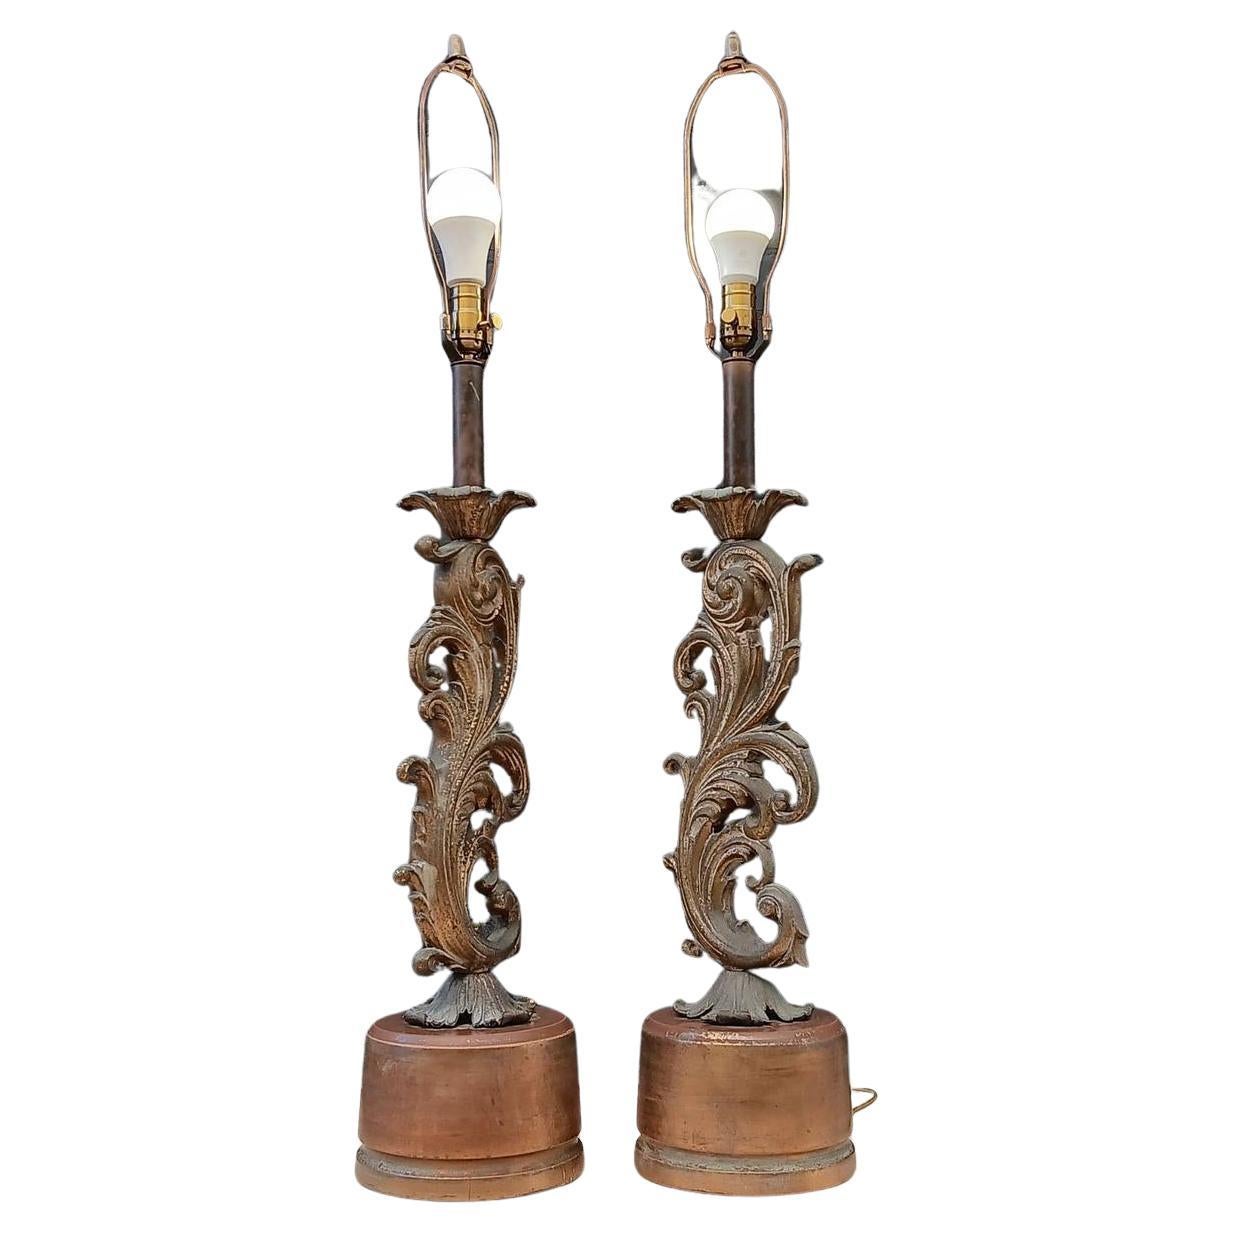 Pair of Italian Baroque Patinated Brass Table Lamps